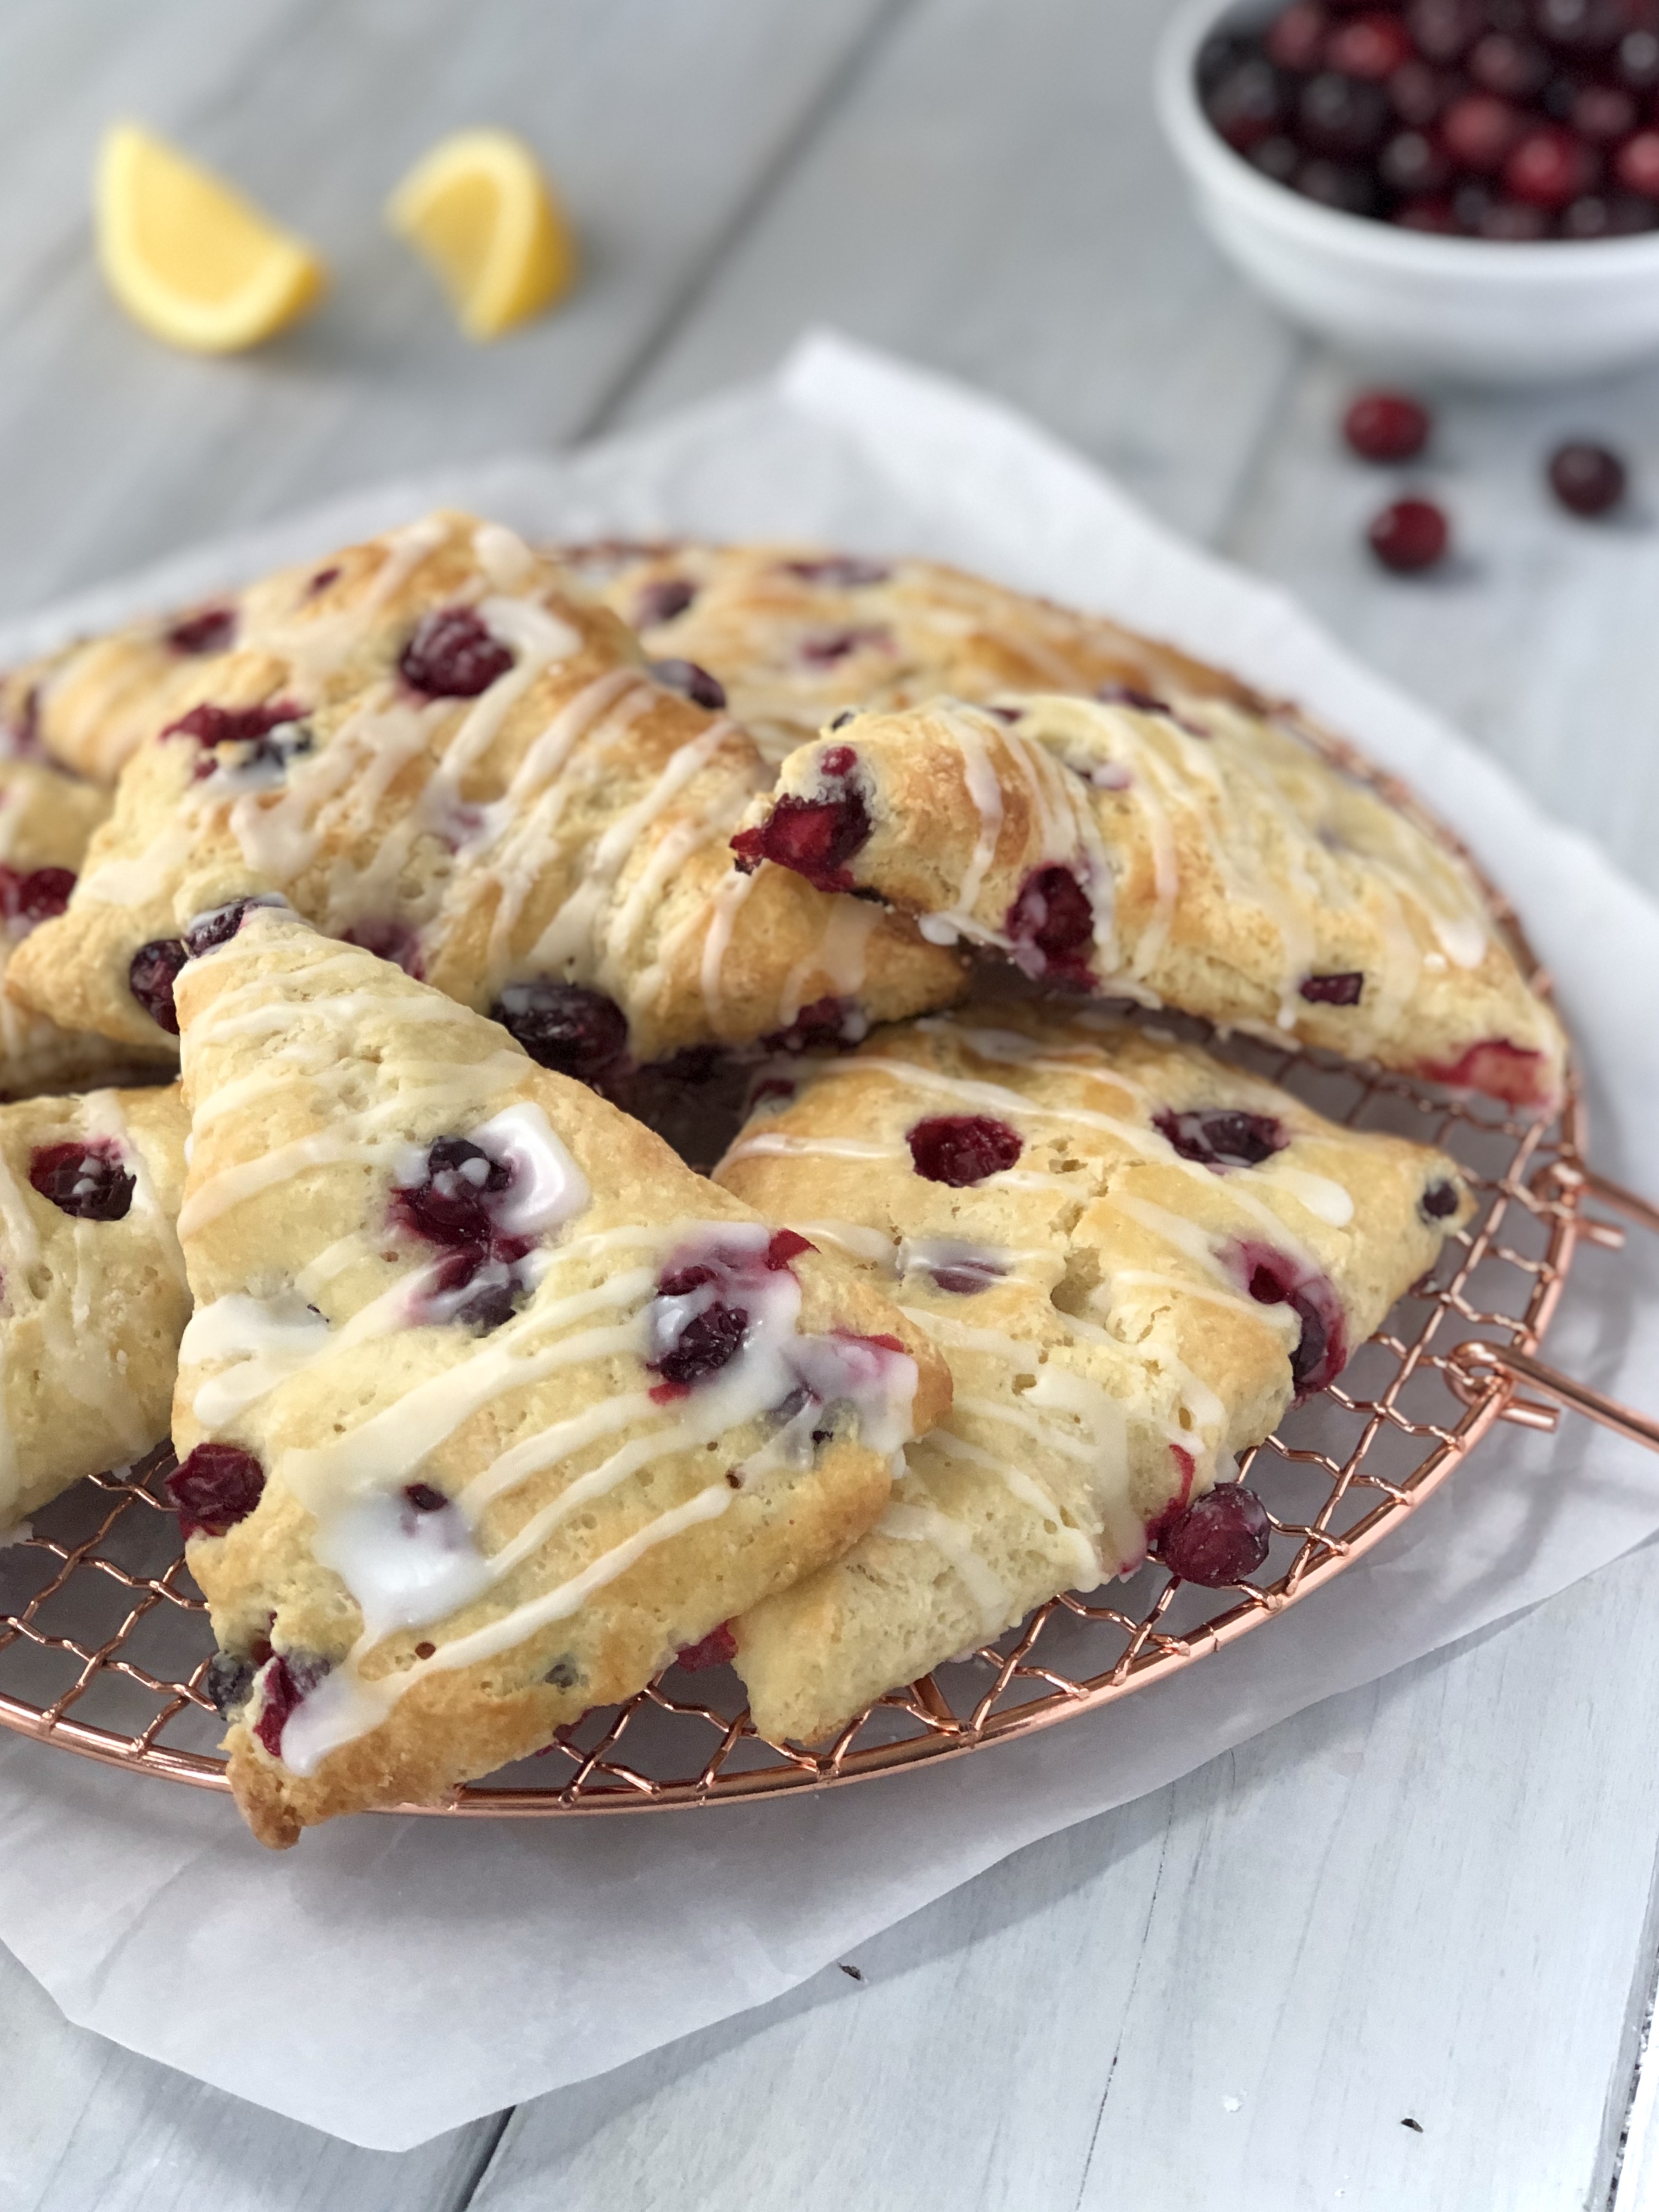 Lemon Cranberry Scones 9 BEST On Rack Closeup and Cropped - The Kitchen ...